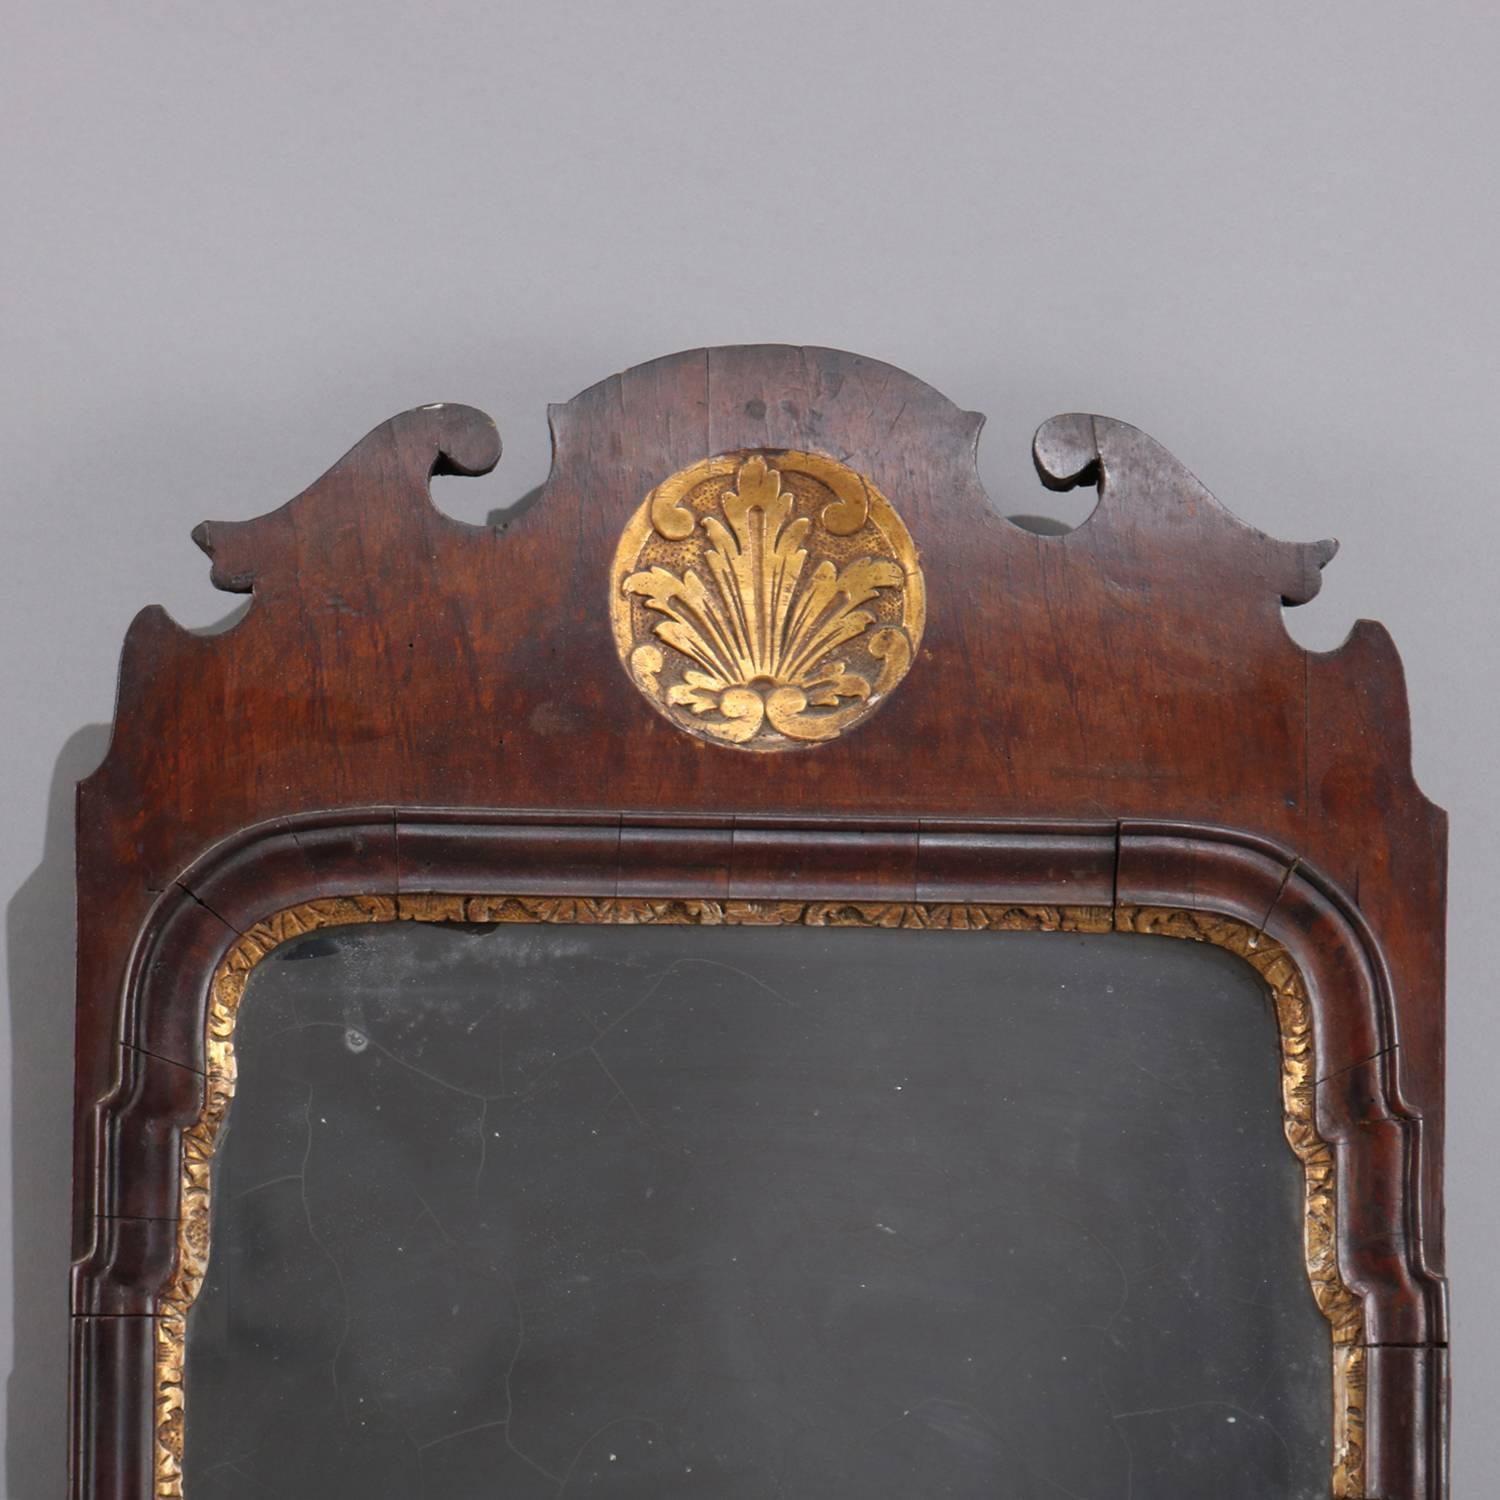 18th century English Queen Anne wall mirror features scroll cutout mahogany frame with carved and gilt palmette central reserve on crest, shaped mirror with carved and gilt bordering, fragile and as-is, circa 1730

Measures: 50